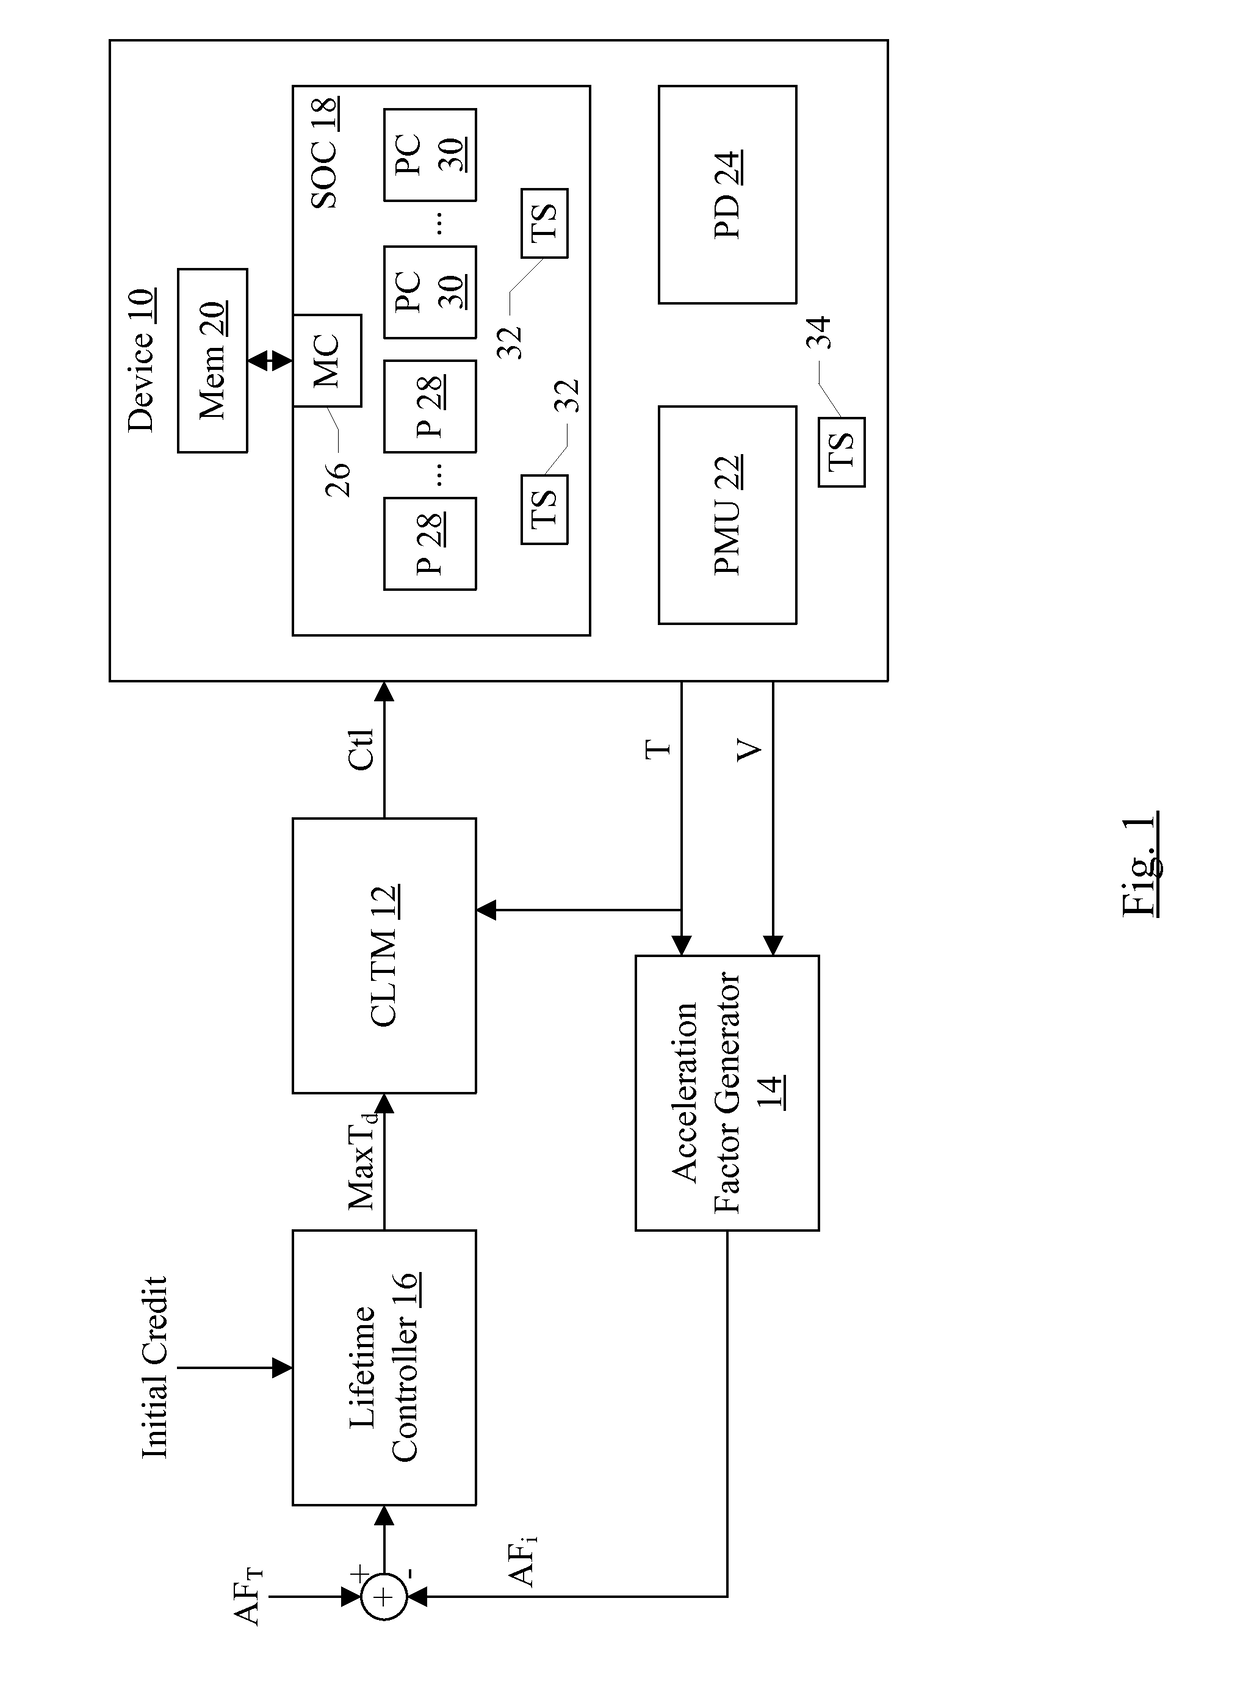 Controlling electrical device based on temperature and voltage